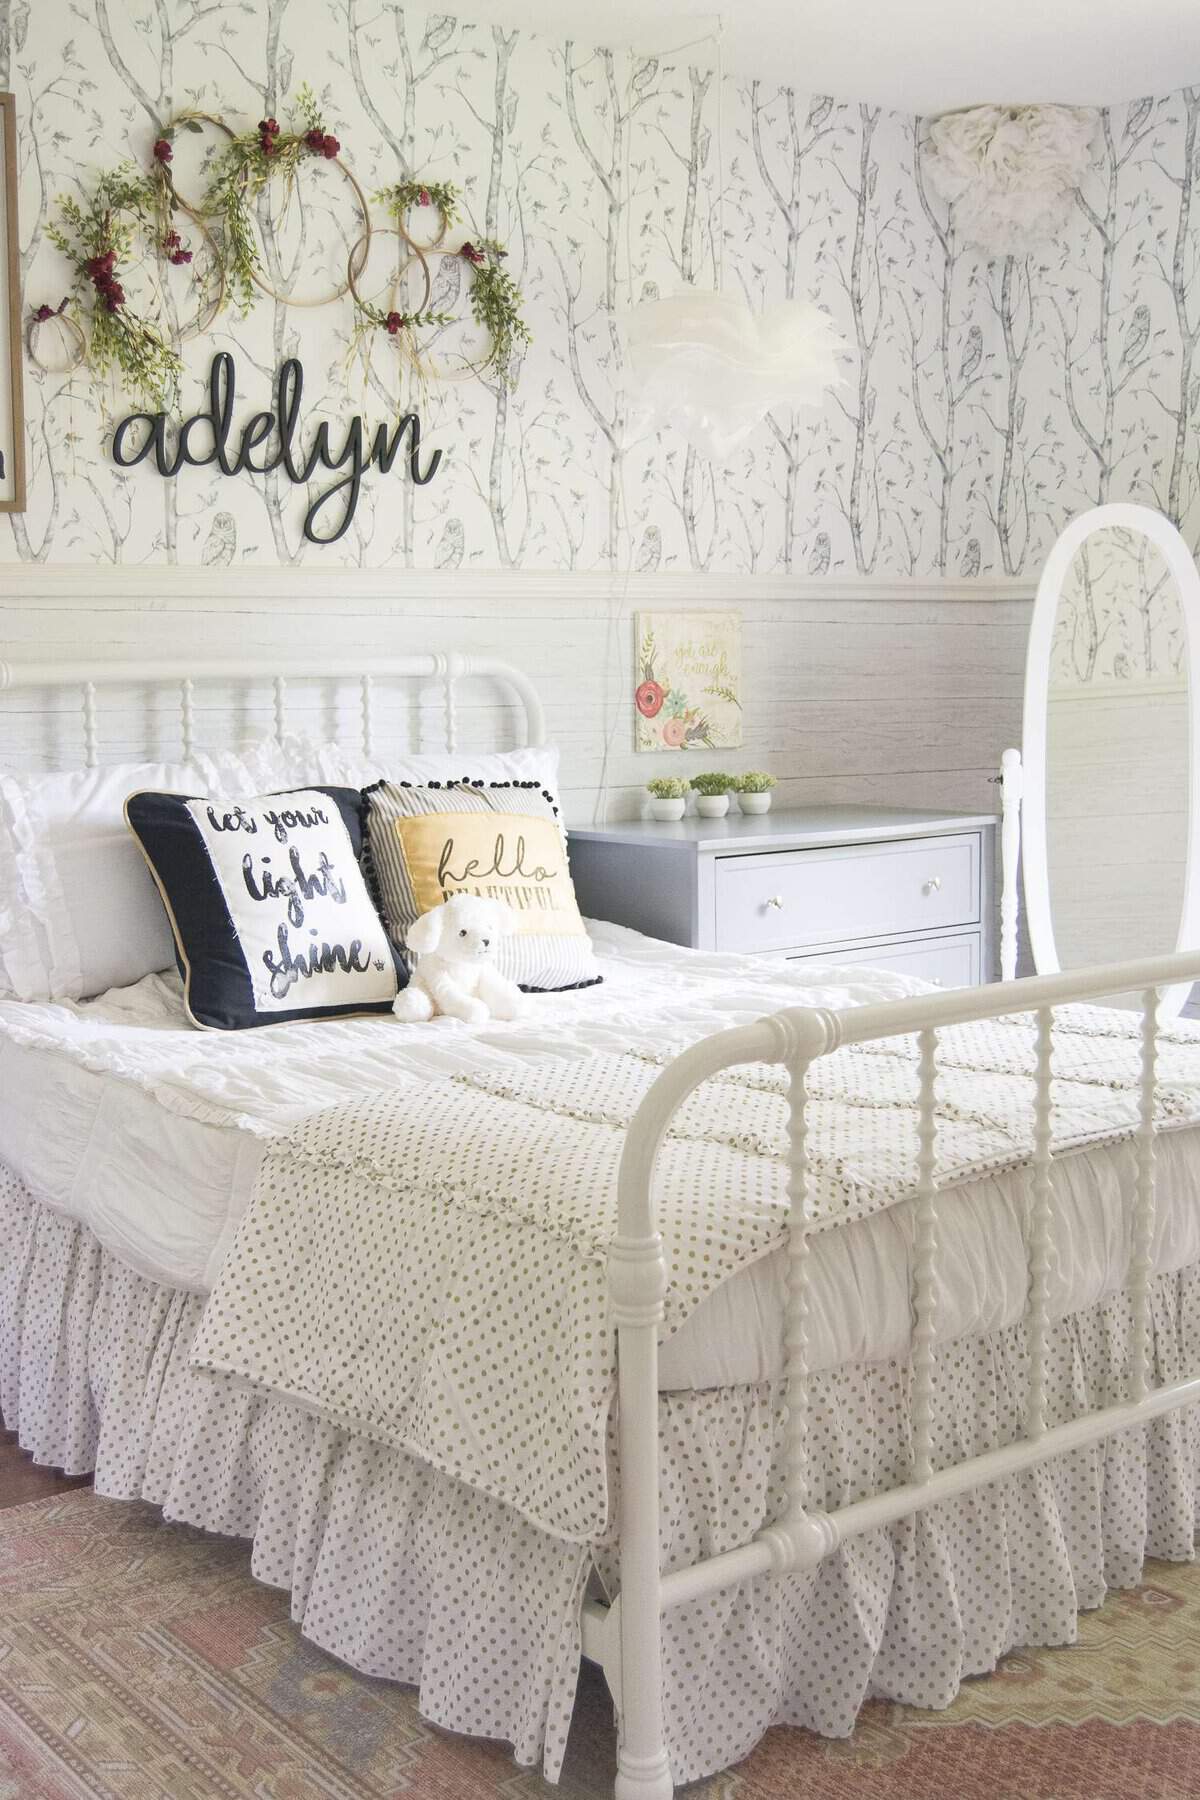 Do you want to create a beautiful girls bedroom for someone special? See how I created structure and playfulness with design in my girls bedroom reveal.